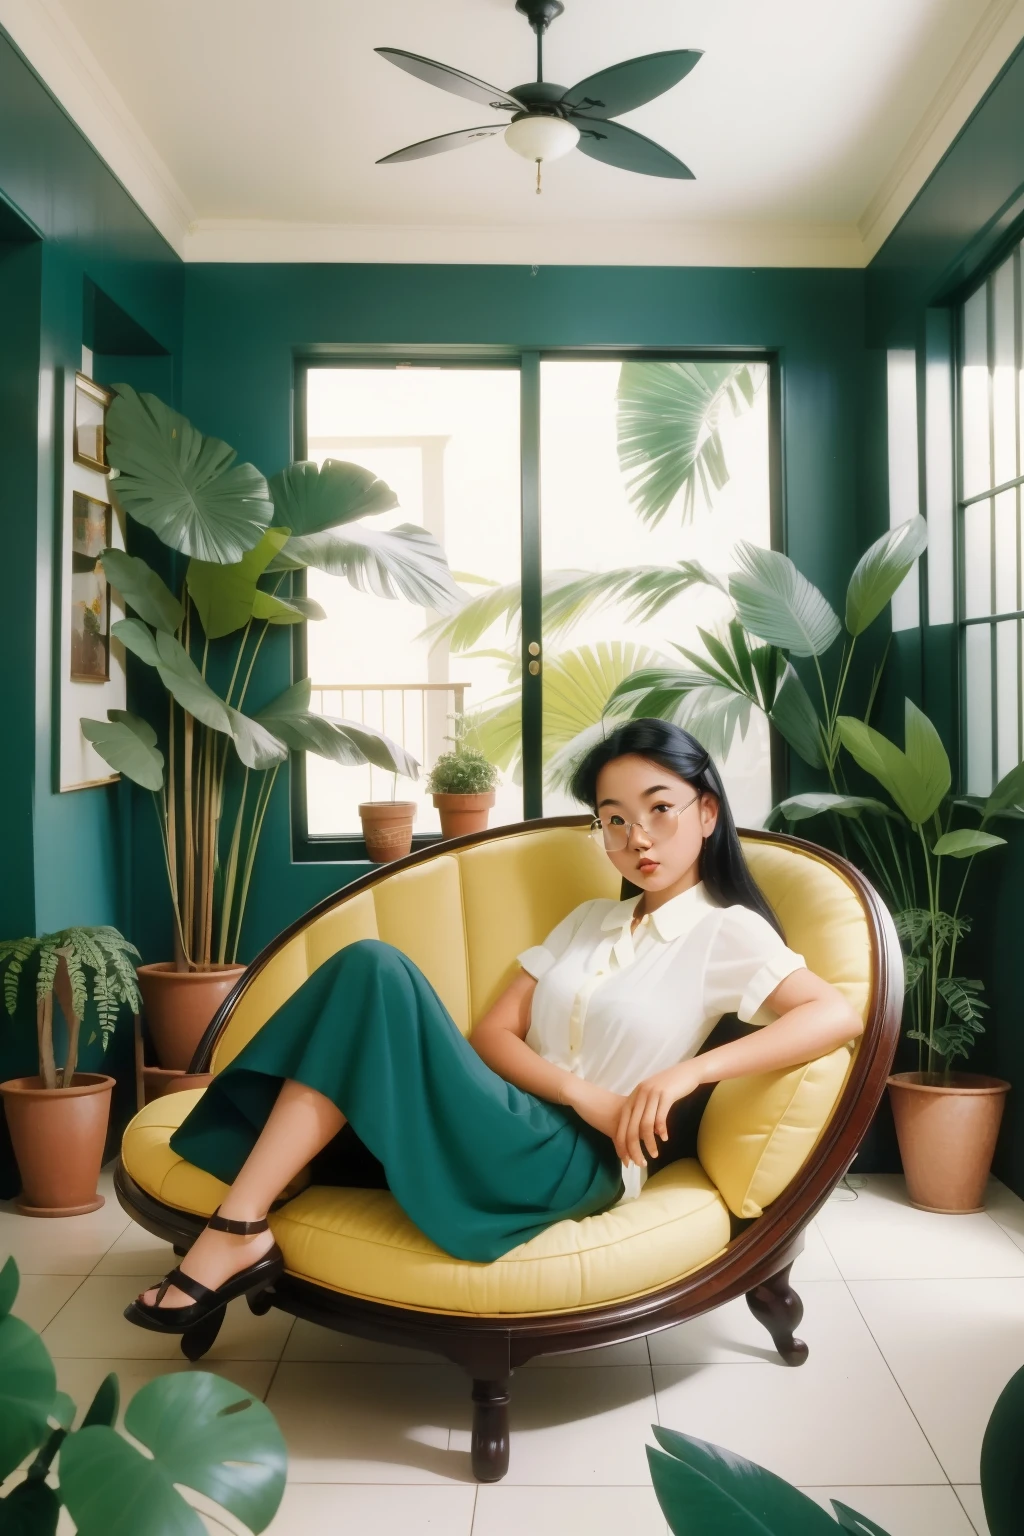 In the whimsical atrium of a coastal Victorian mansion in the 1990s, a fourteen-year-old Asian girl, with a cascade of glossy black hair and round glasses, lounges on a vintage chaise longue, engrossed in a well-worn detective novel, surrounded by potted ferns and rattan furniture.